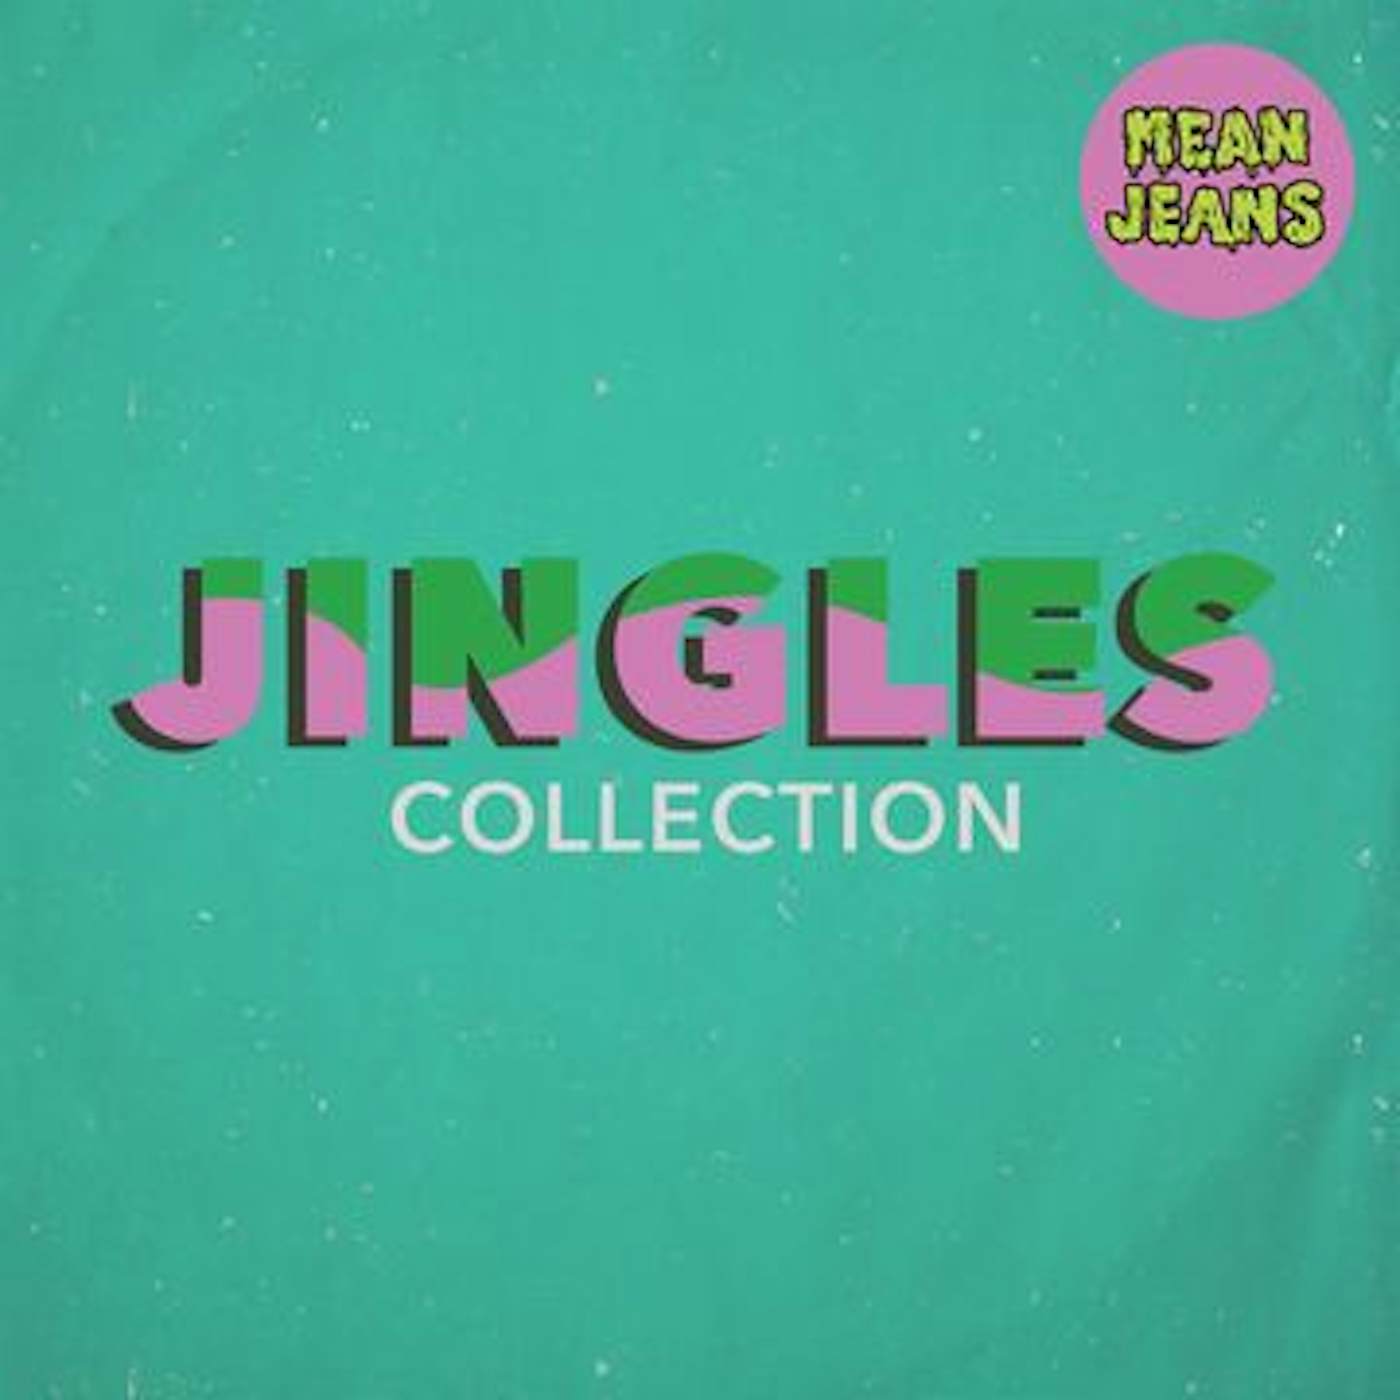 Mean Jeans Jingles Collection Vinyl Record